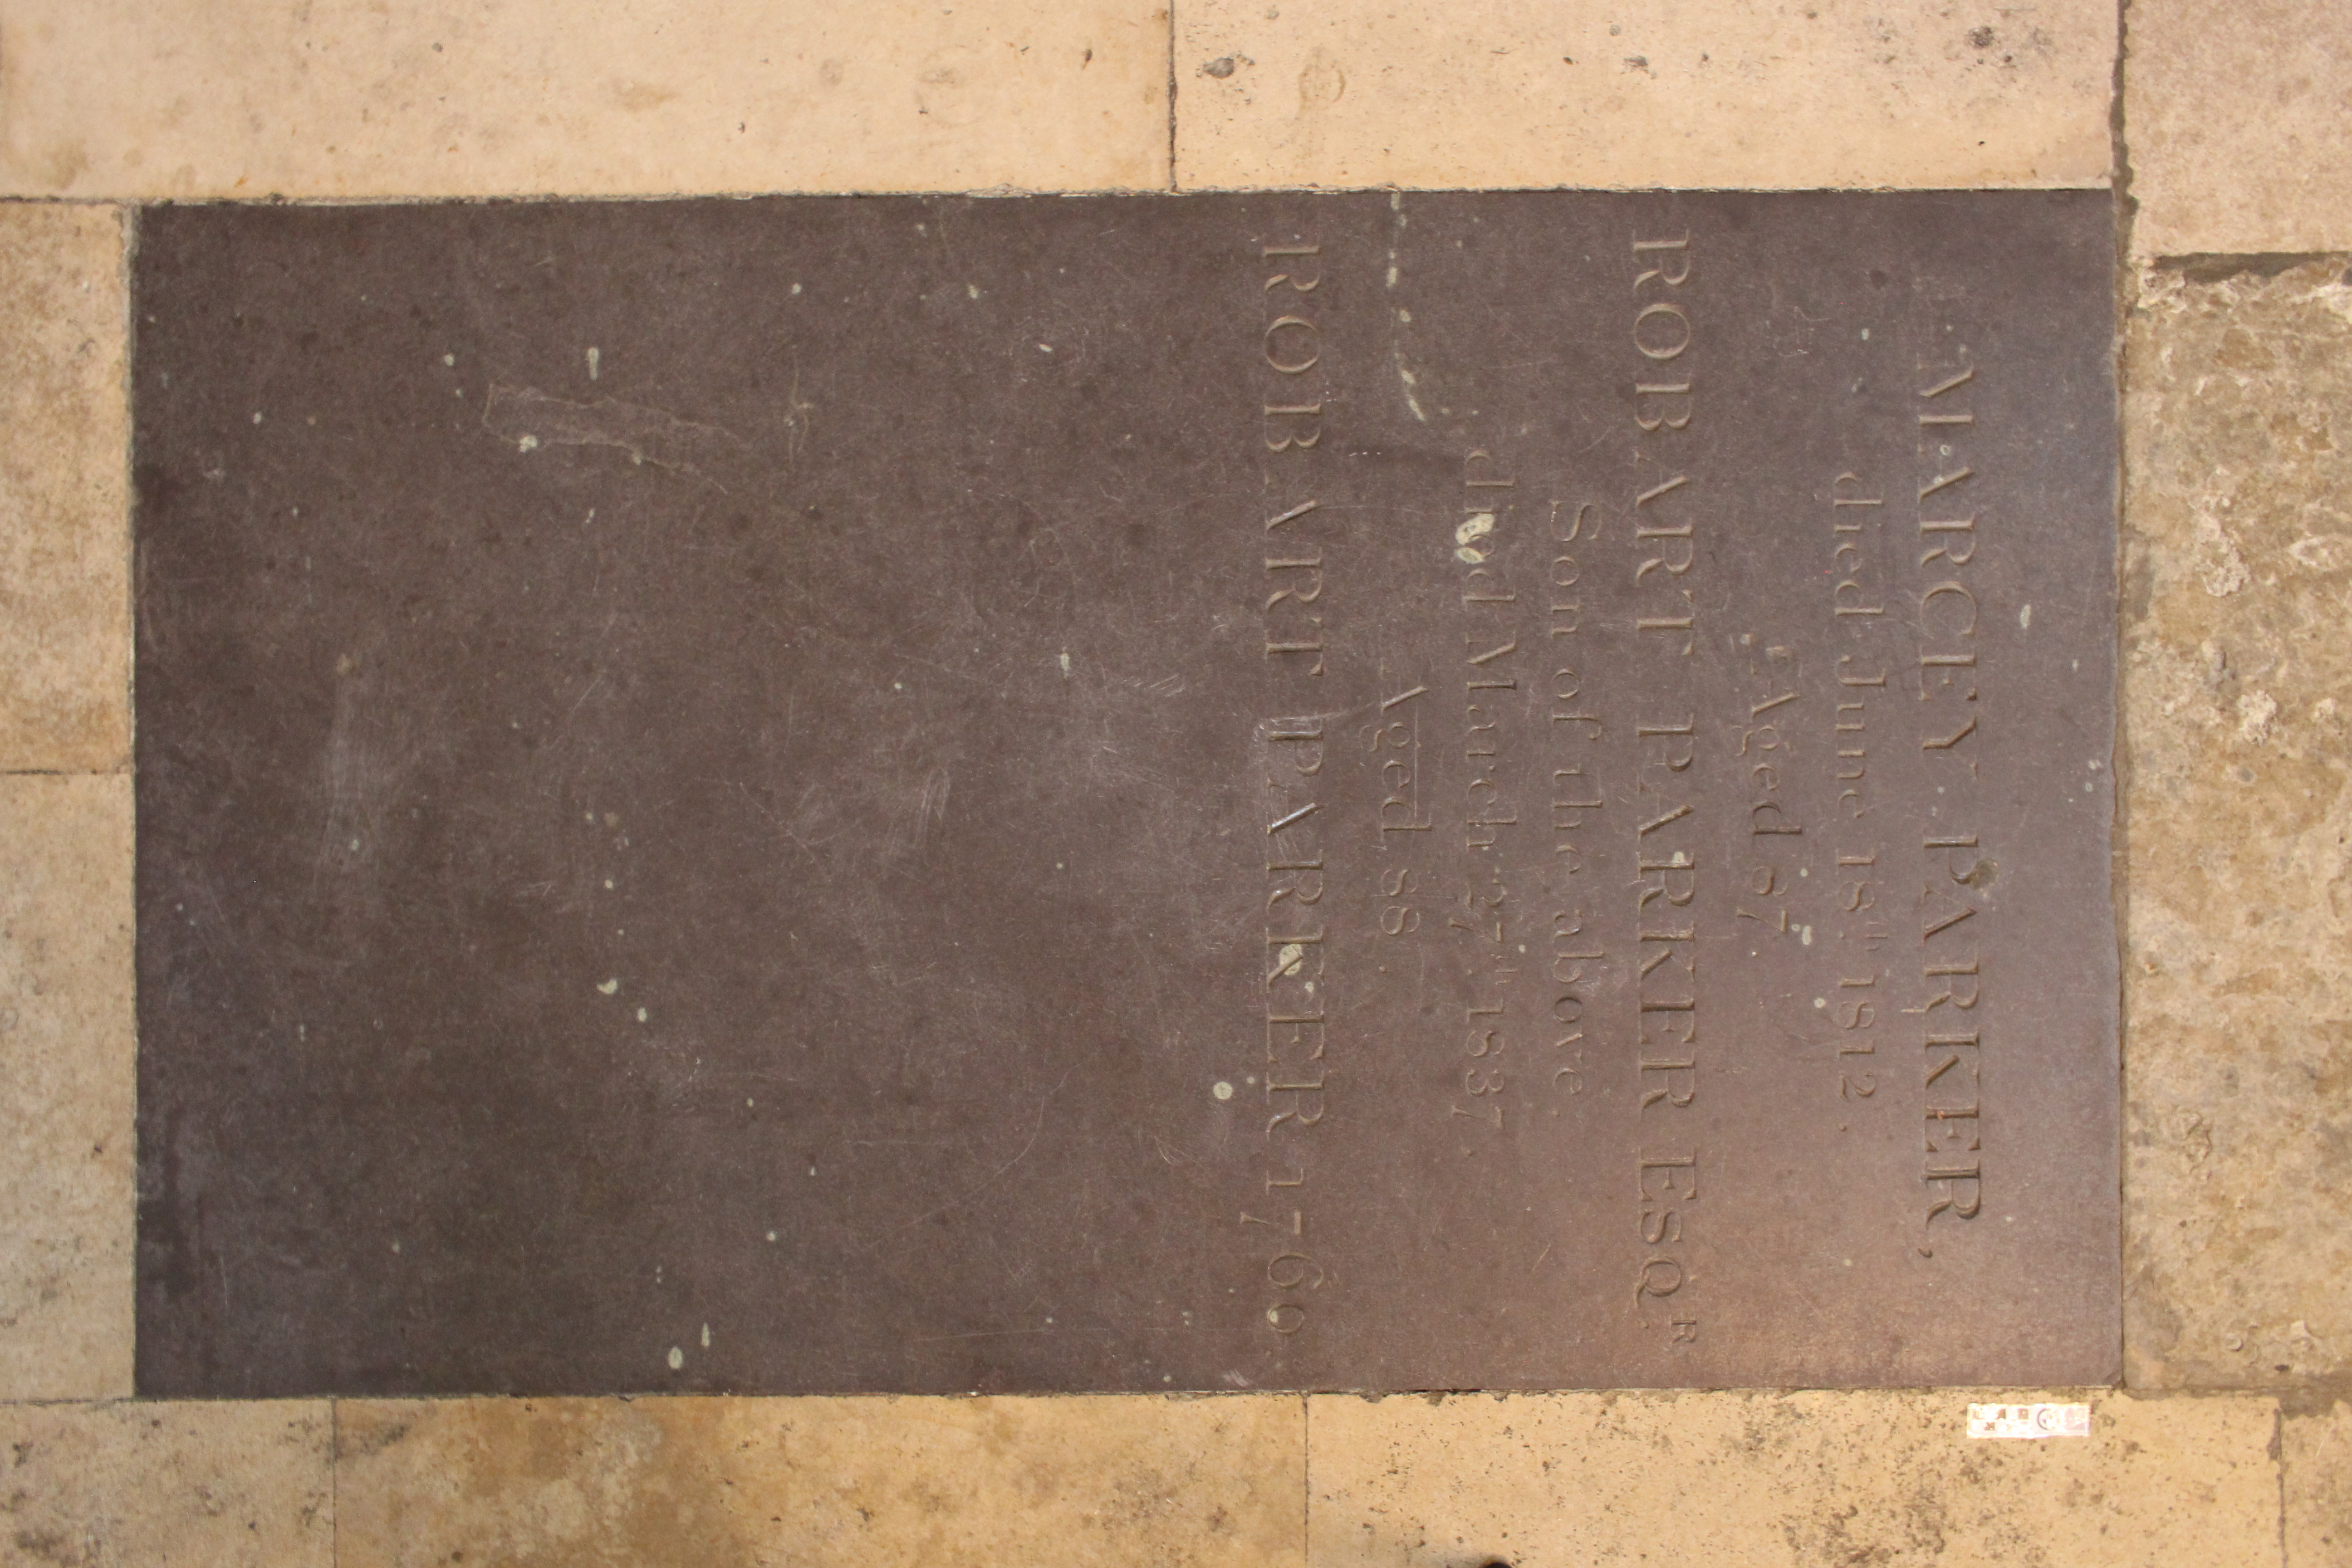 Photograph of the ledger stone dedicated to Marcey, Robart (snr) and Robart (jnr) Parker in the south nave transept.